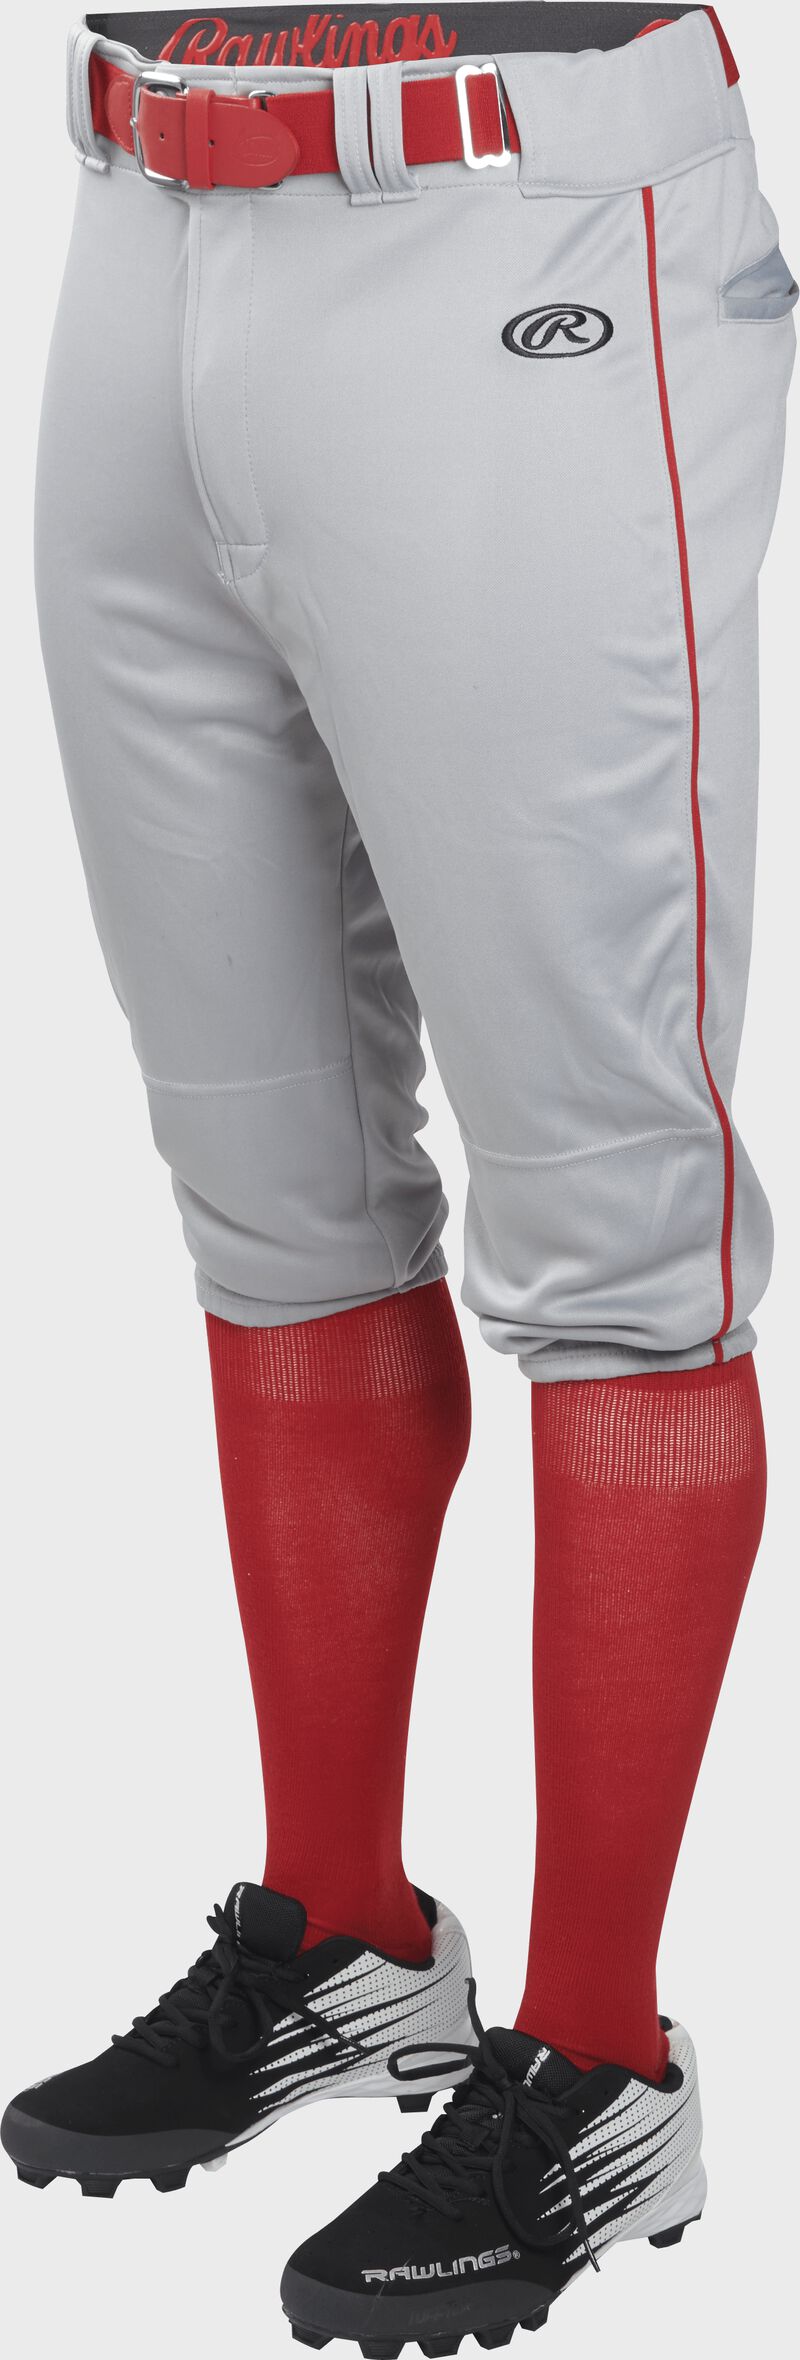 Front of Rawlings Blue Gray/Scarlet Adult Launch Piped Knicker Baseball Pant - SKU #LNCHKPP-BG/S